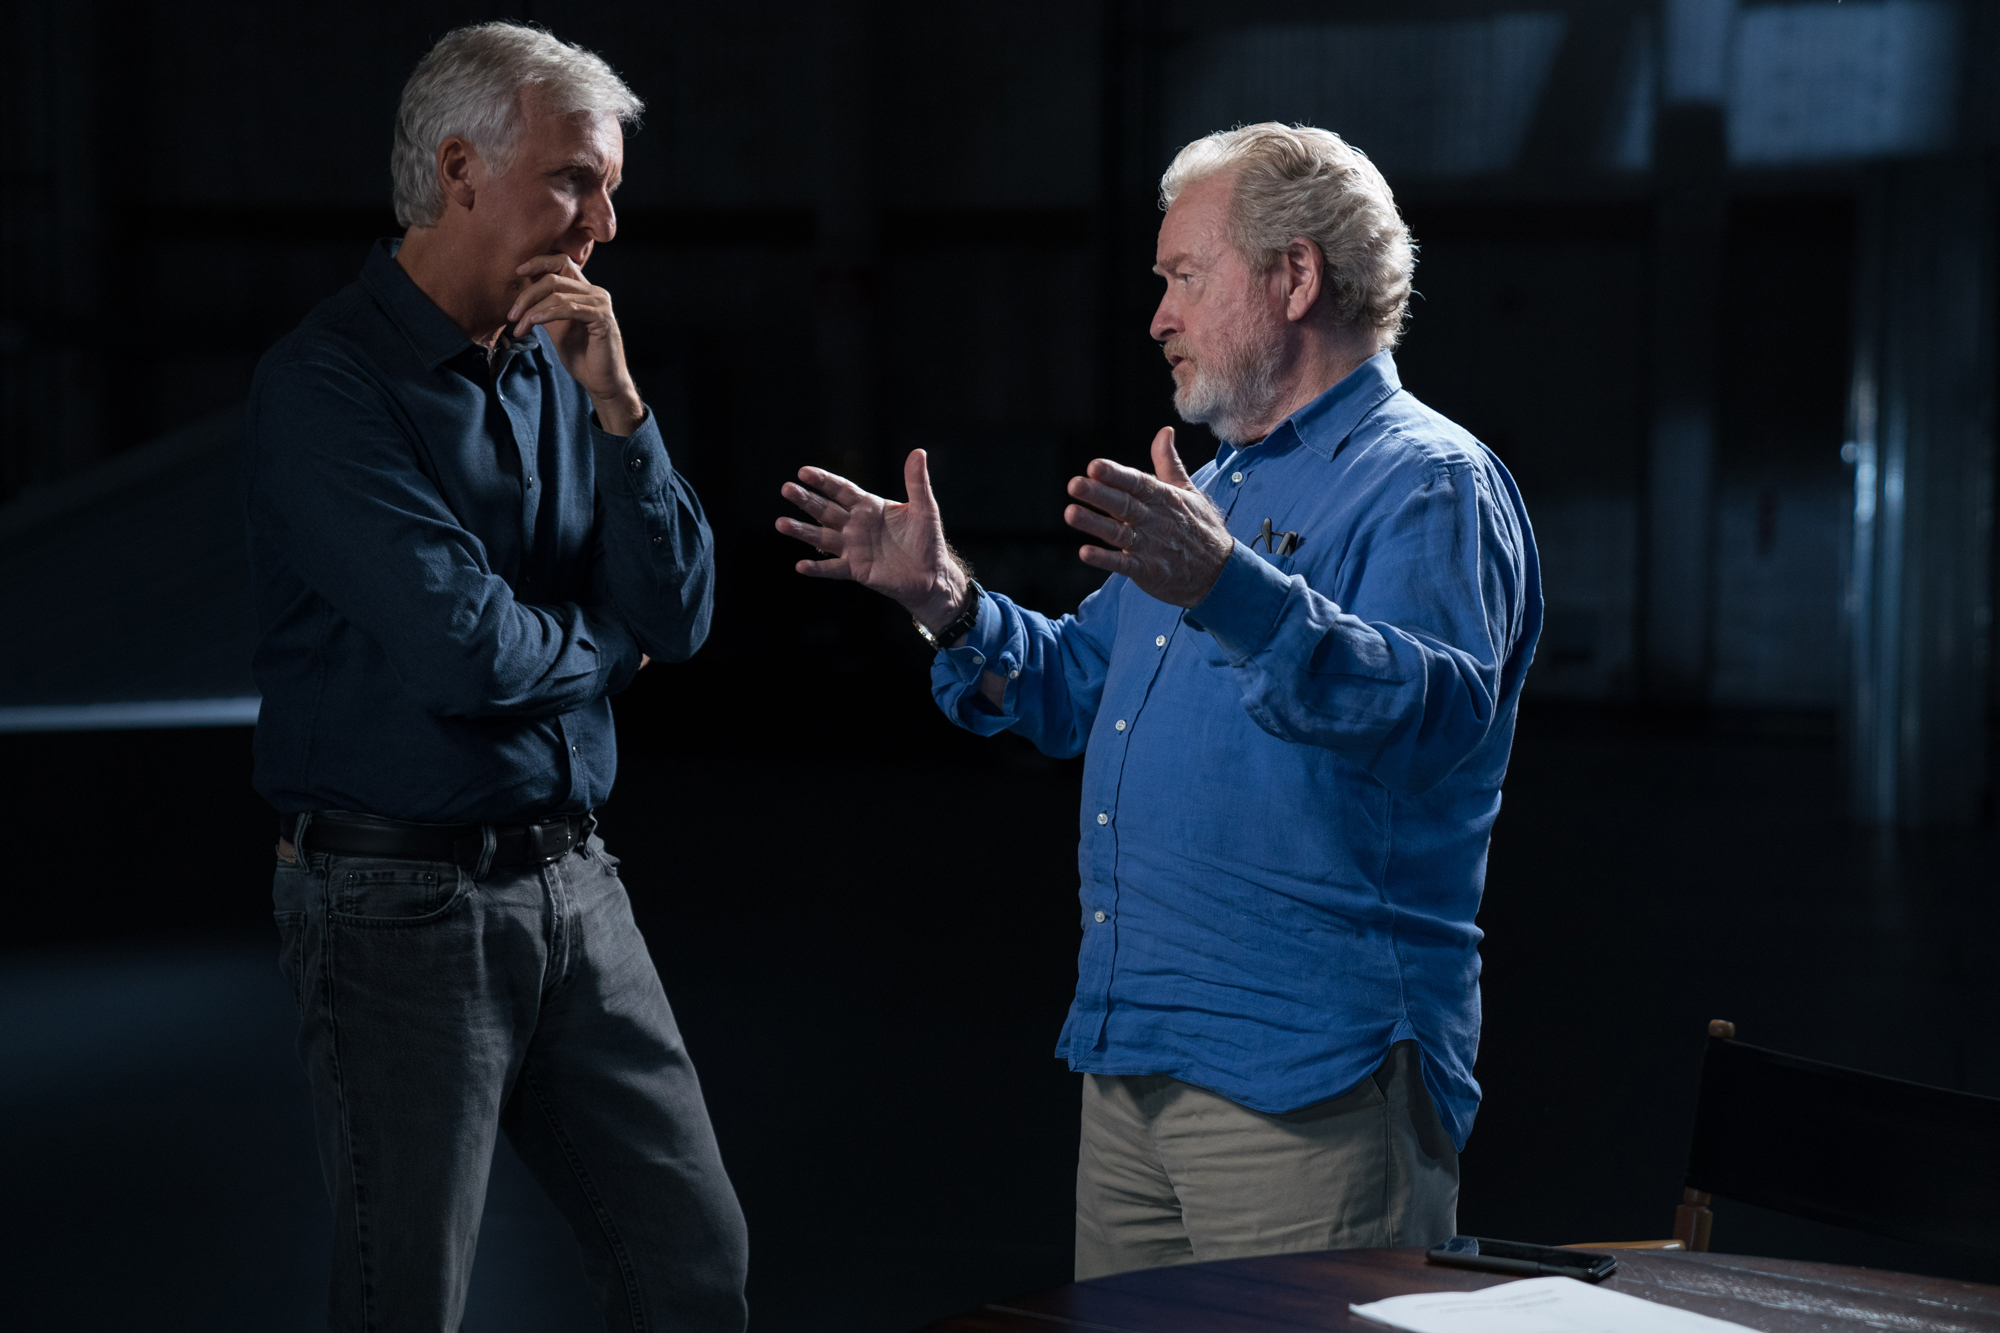 Famed directors James Cameron and Ridley Scott talk aliens in "AMC Visionaries: James Cameron's Story of Science Fiction," which premieres on AMC on April 30.